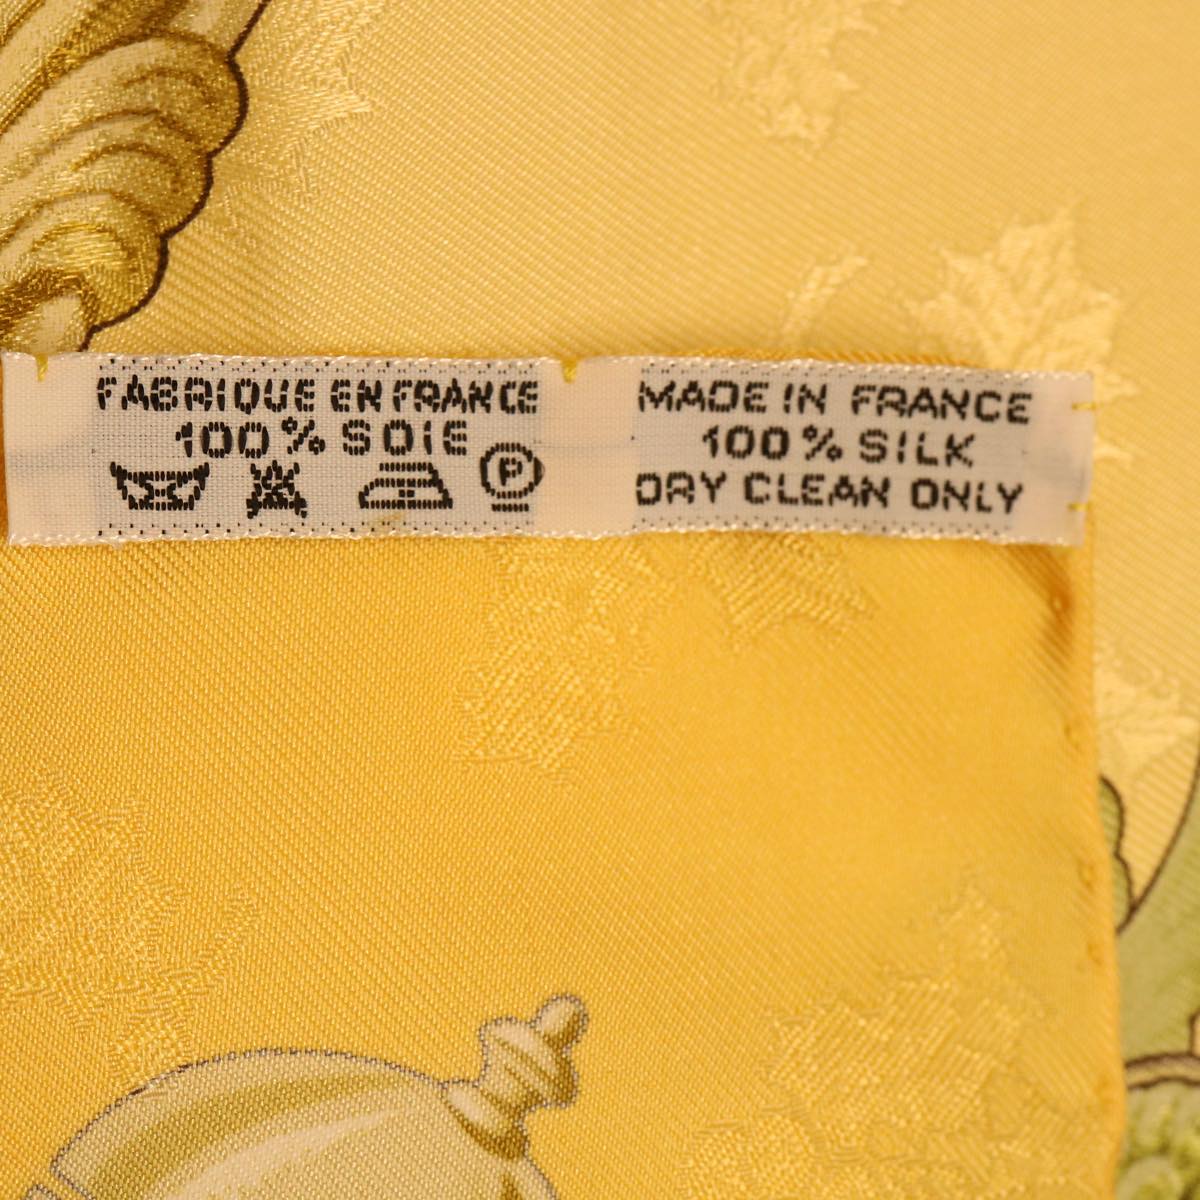 HERMES Carre 90 Scarf ""Plumes et Grelots"" Silk Yellow Auth 50267